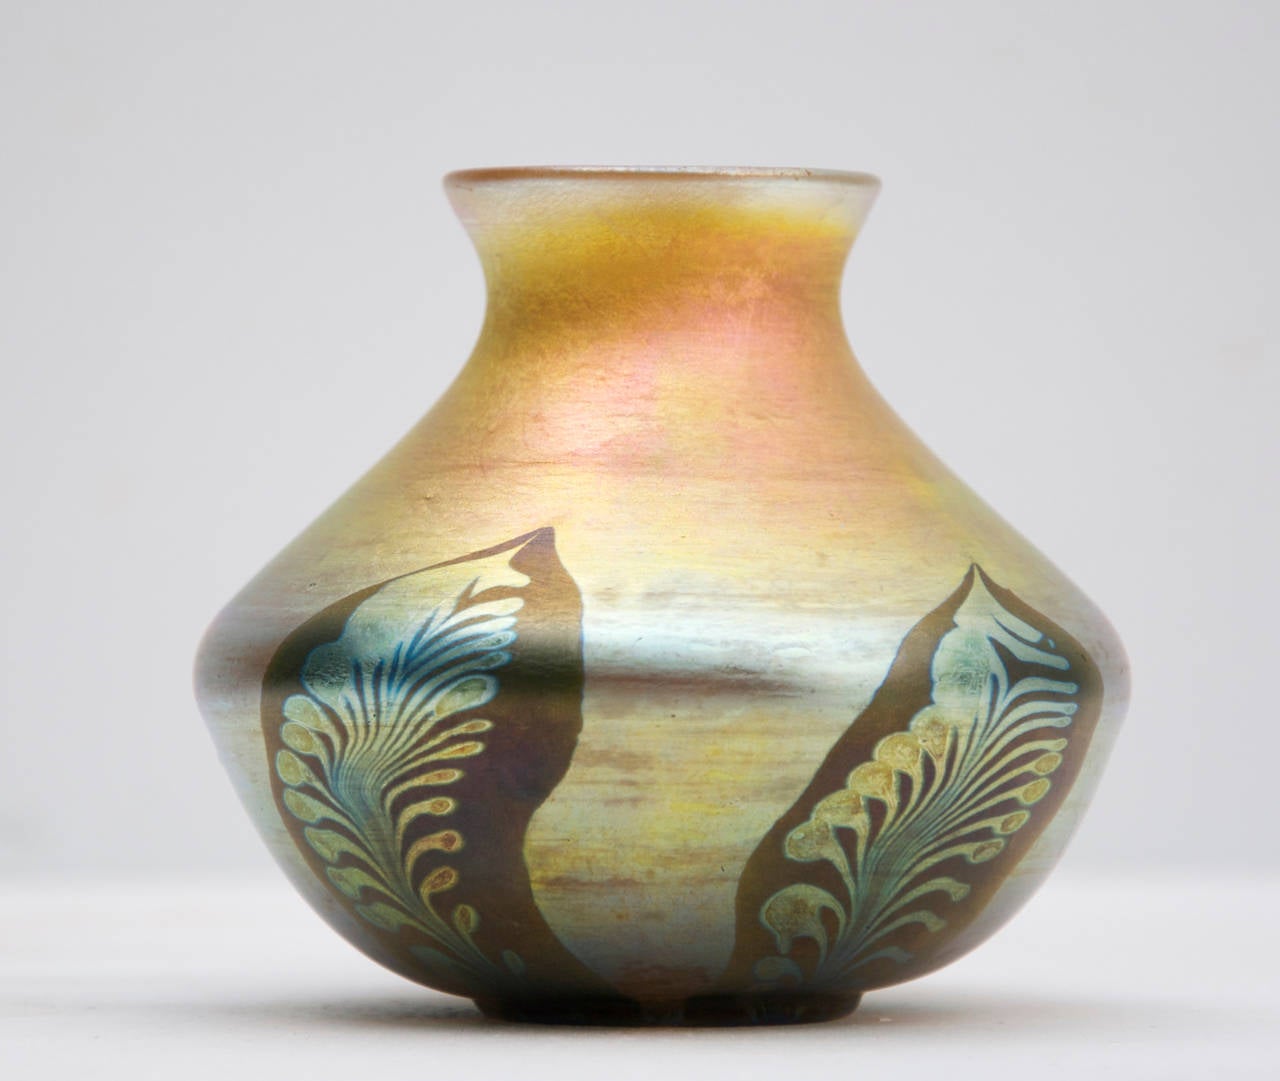 Fine quality Louis Comfort Tiffany Favrile glass vase with pulled feather decoration on gold iridescent body, button pontil, signed ‘L C Tiffany favrile V194’ circa 1904  Tiffany Studios, New York. Excellent condition.

Favrile glass was patented